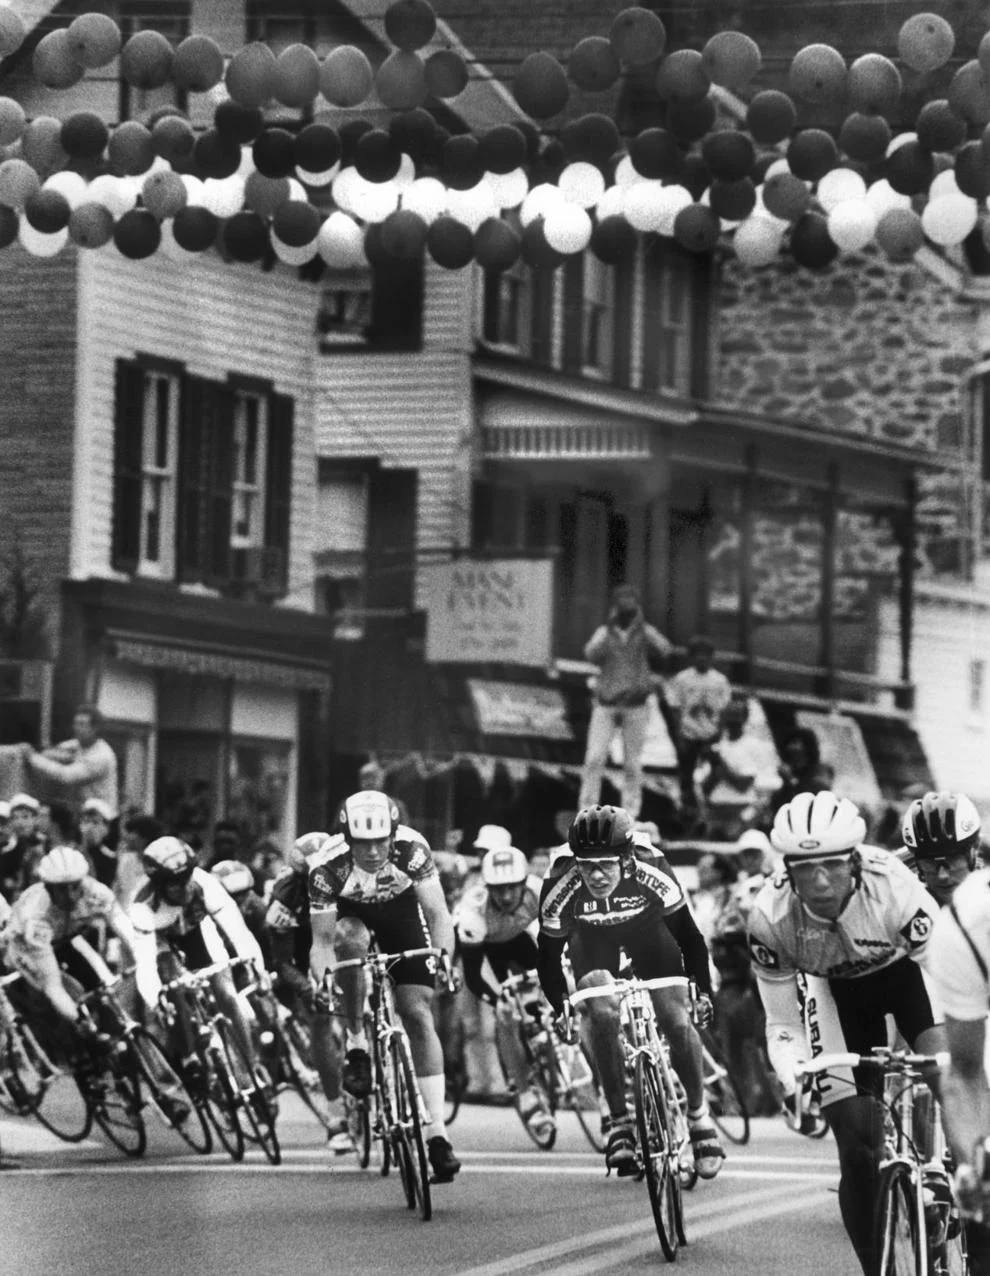 Cyclists in the Tour de Trump rode through Port Deposit, Md., on their way to Virginia. The cyclists were scheduled to arrive in Richmond the next day, where they would run a 38.4-mile team trial, 1990.